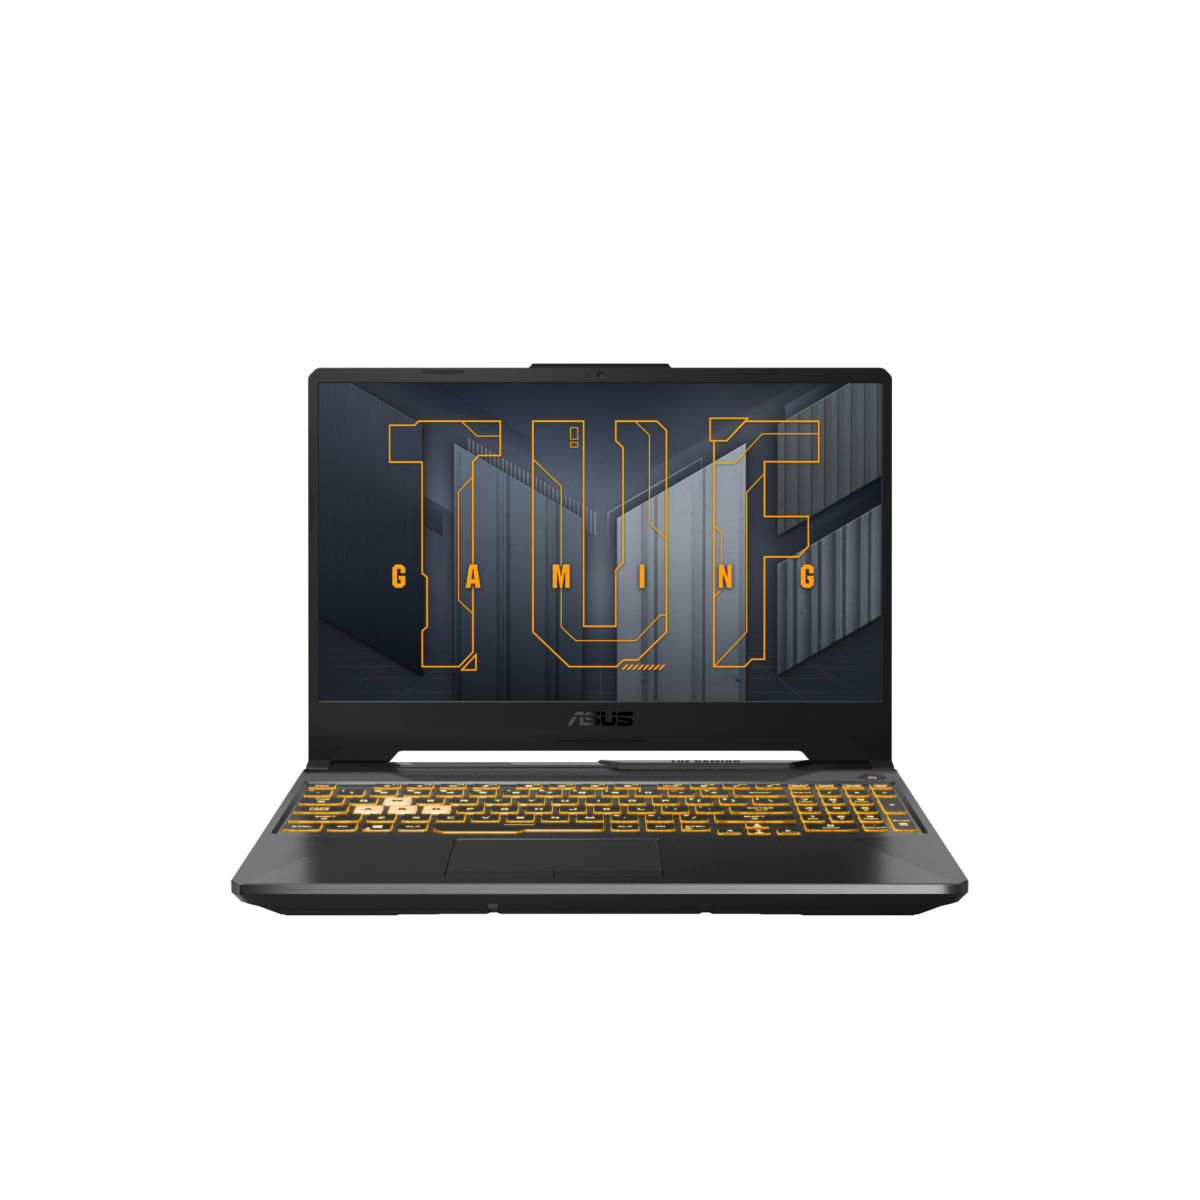 ASUS TUF Gaming A15 FA506IE-US73 15.6 Laptop